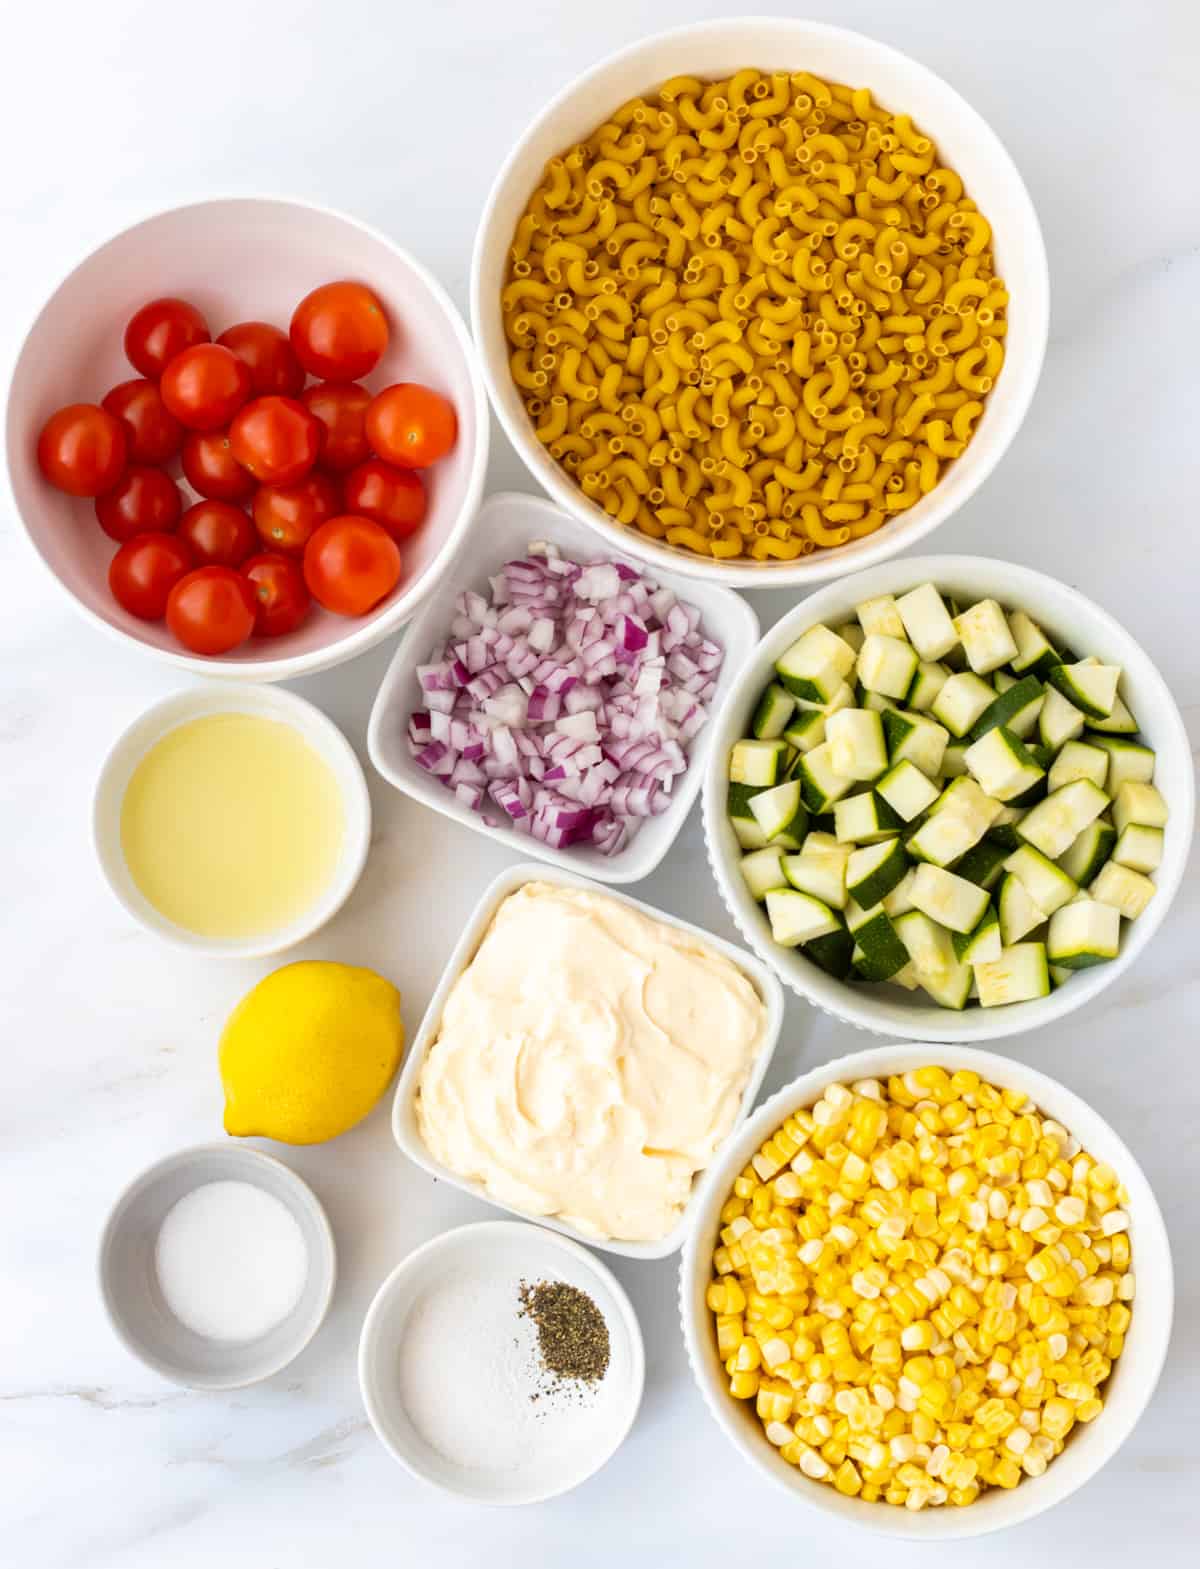 Ingredients for creamy corn and zucchini pasta salad.